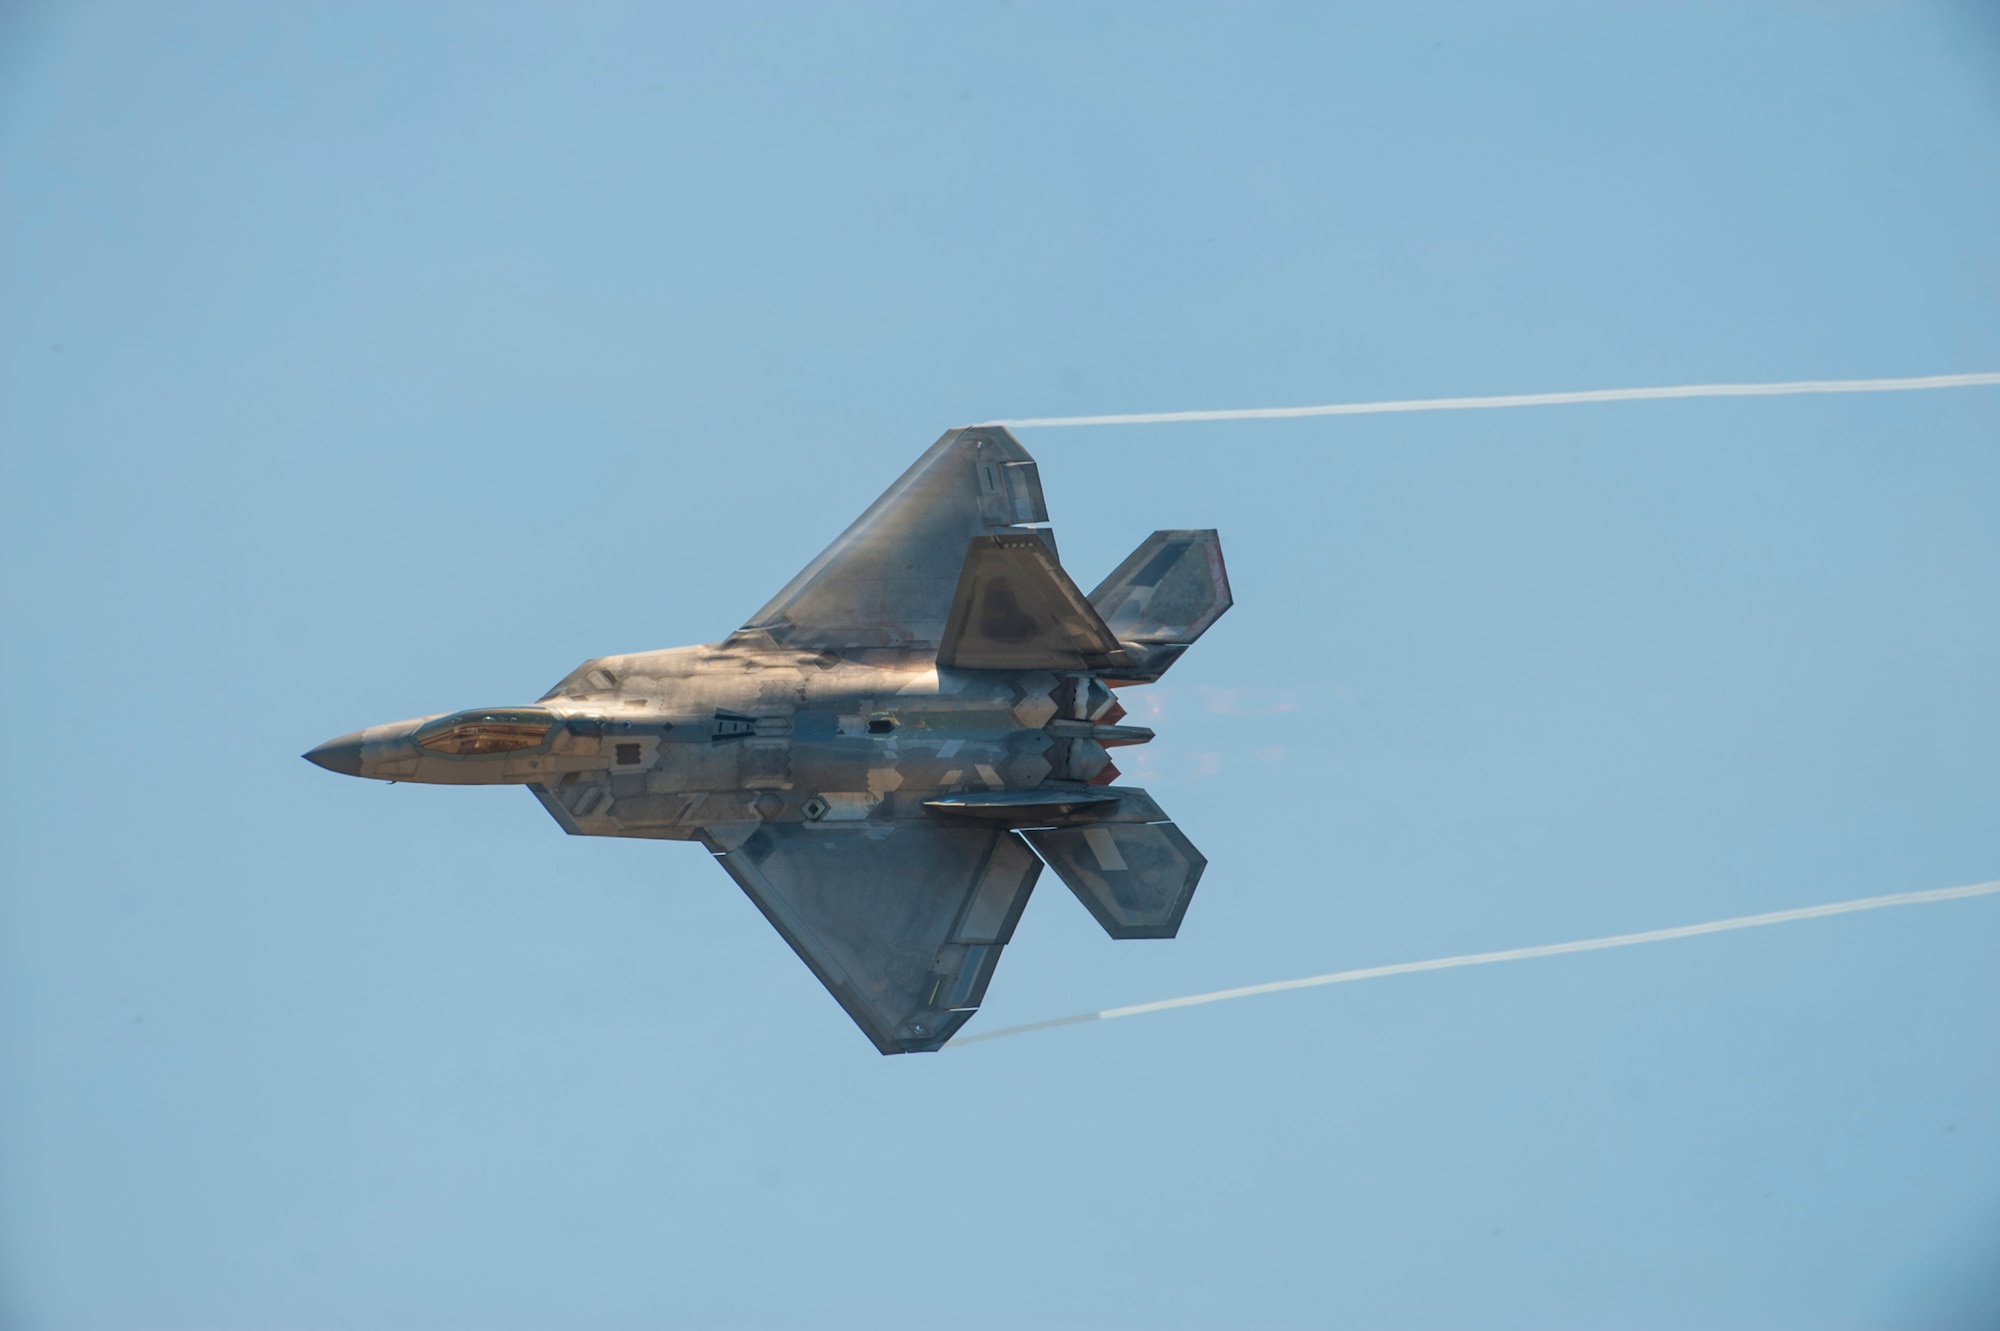 An F-22 Raptor performs high-speed turns during Tampa Bay AirFest 2018 at MacDill Air Force Base, Fla., May 11, 2018.